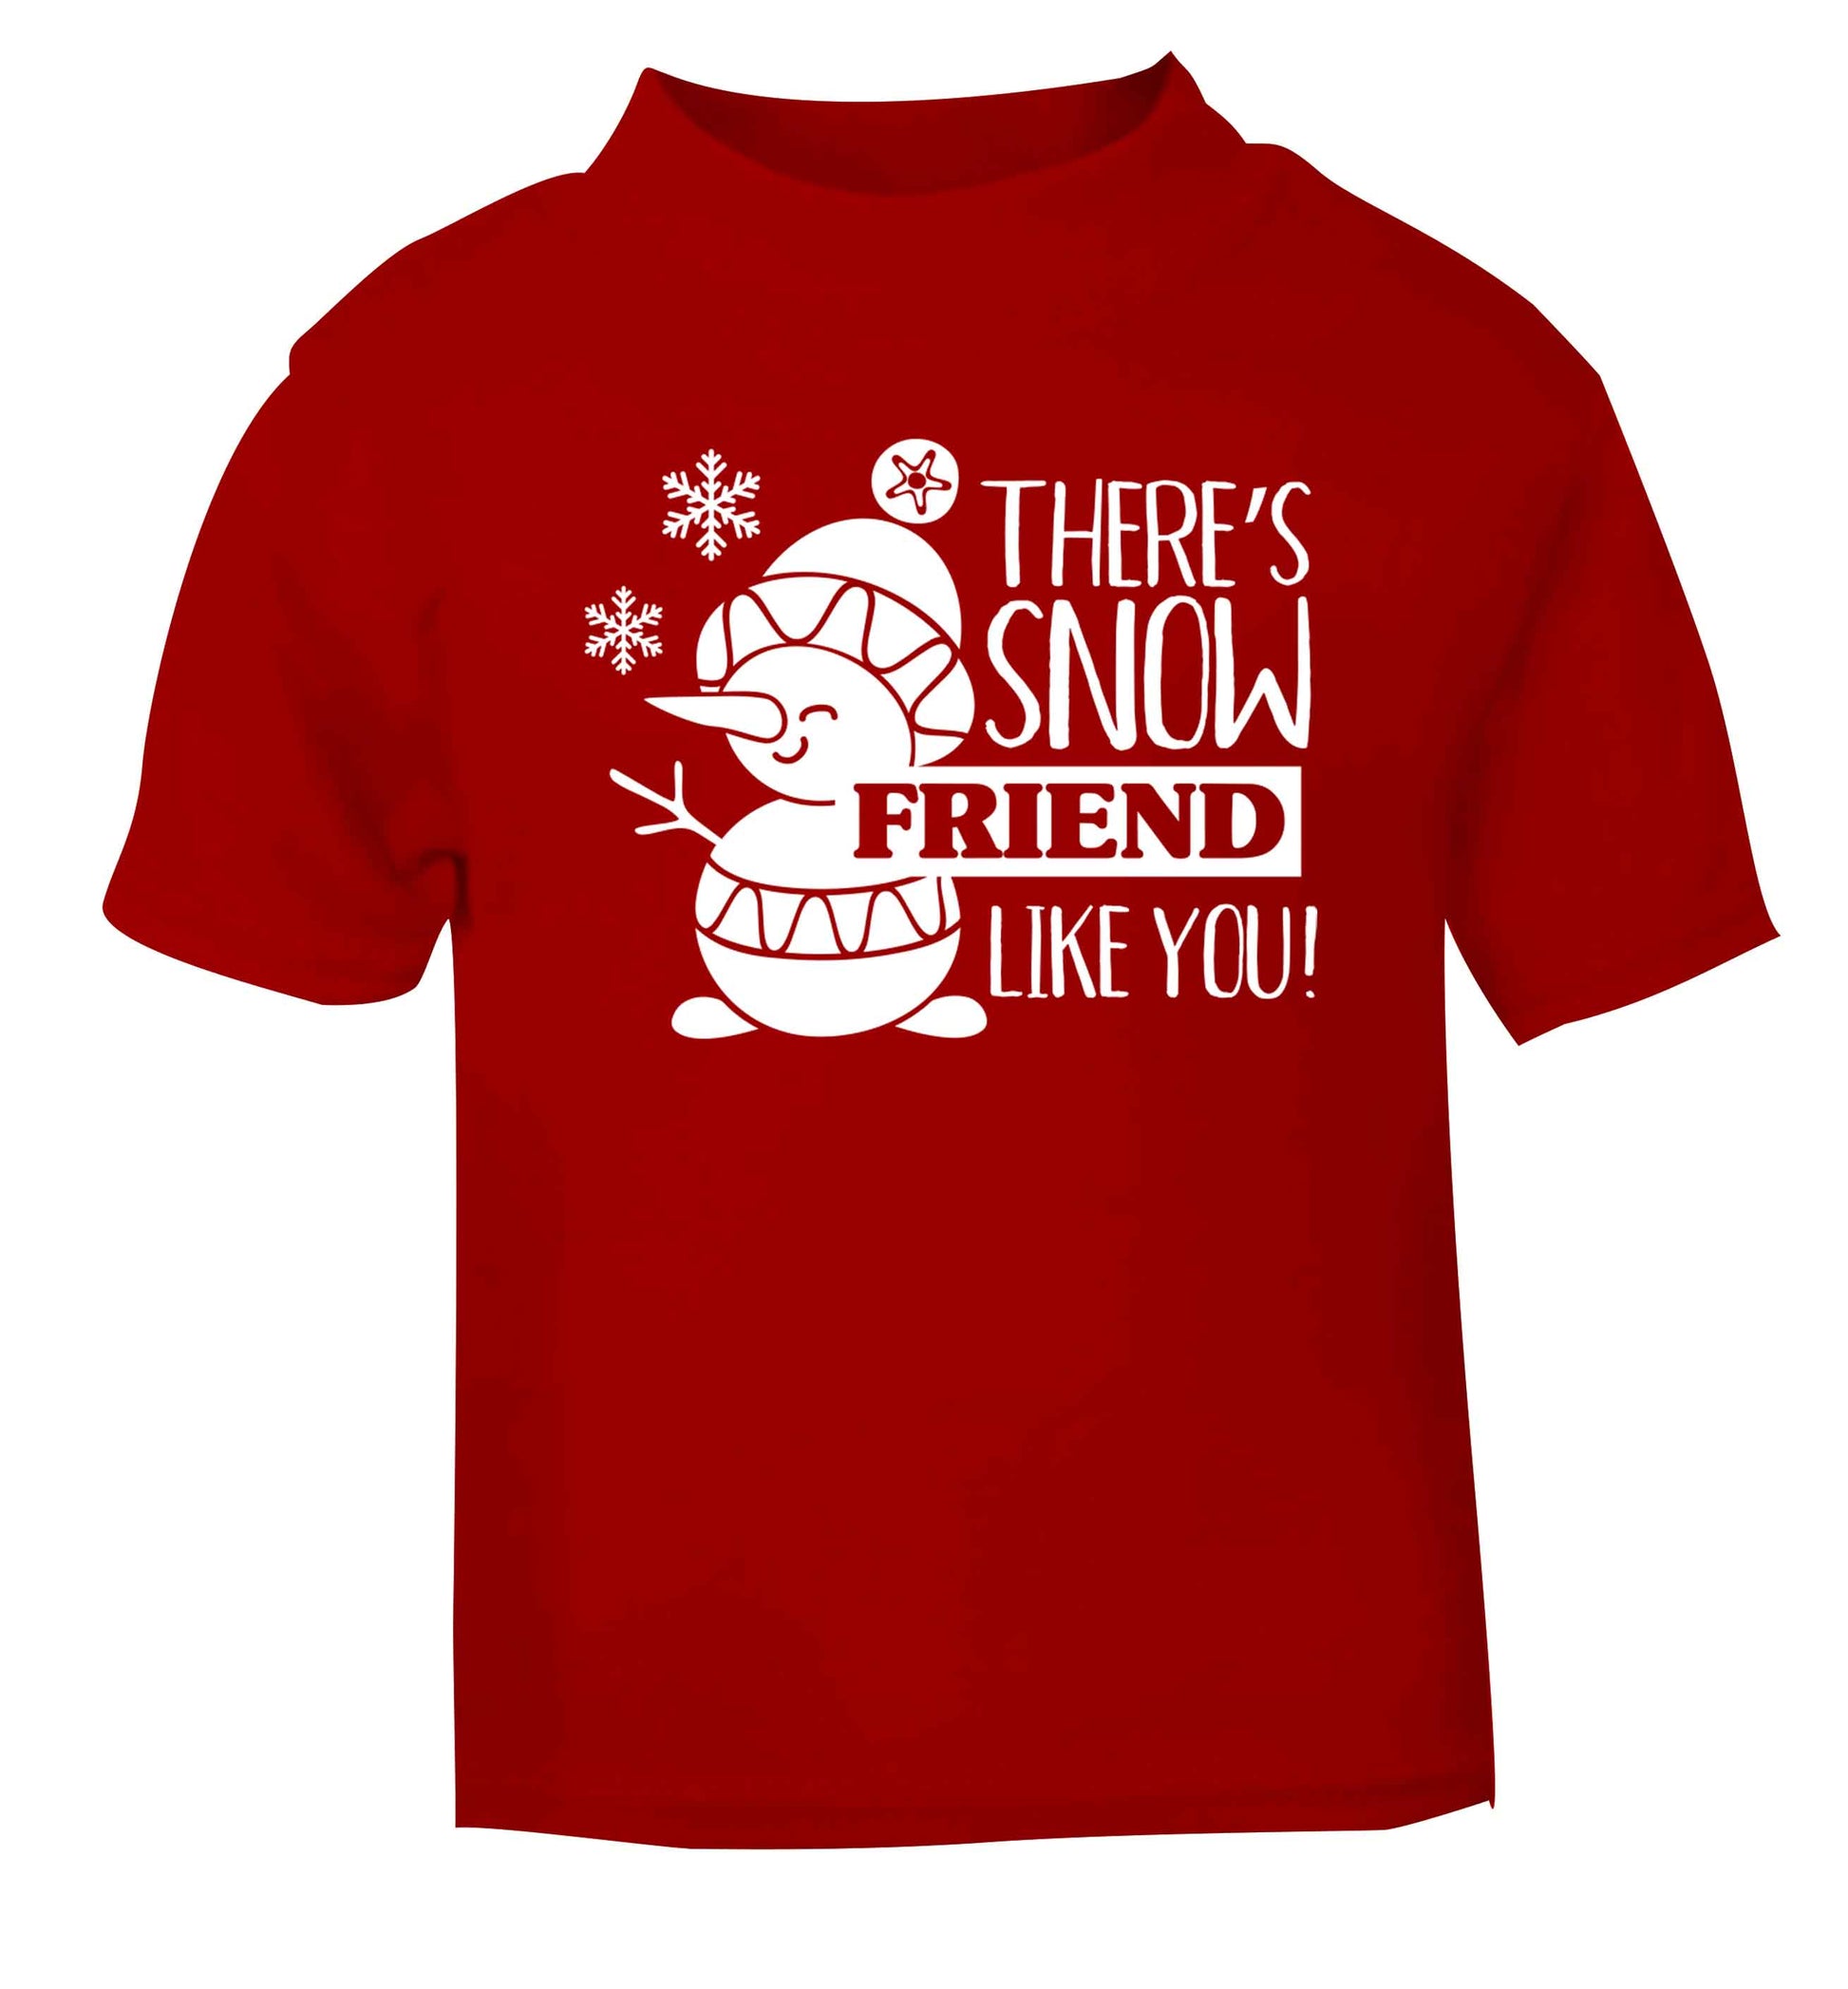 There's snow friend like you red baby toddler Tshirt 2 Years